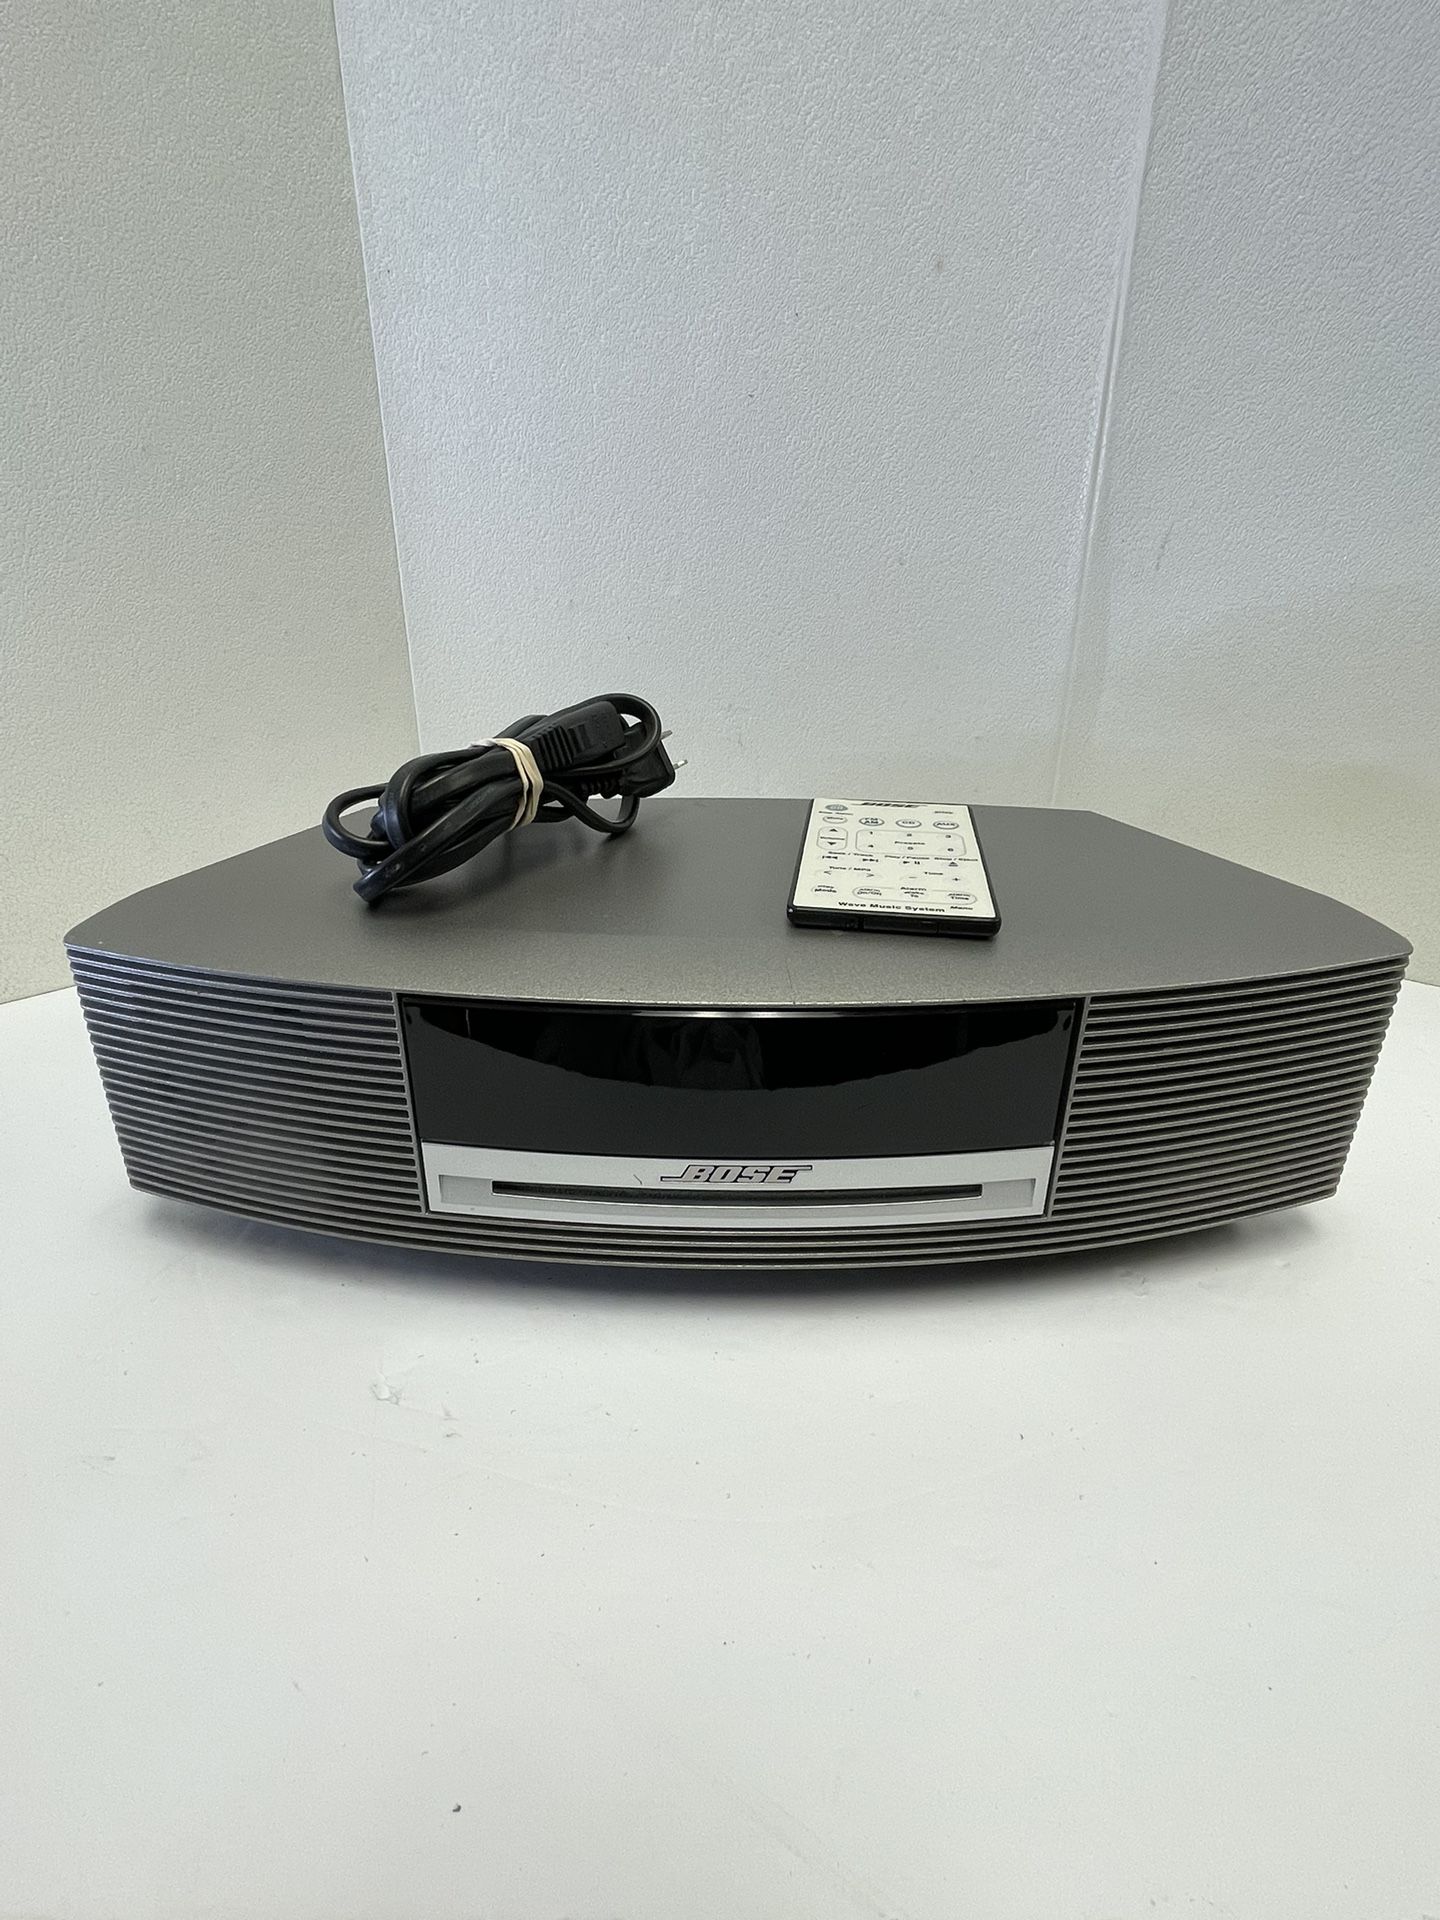 Bose Wave Music System III AM FM CD Player Touch Panel  TITANIUM SILVER Tested